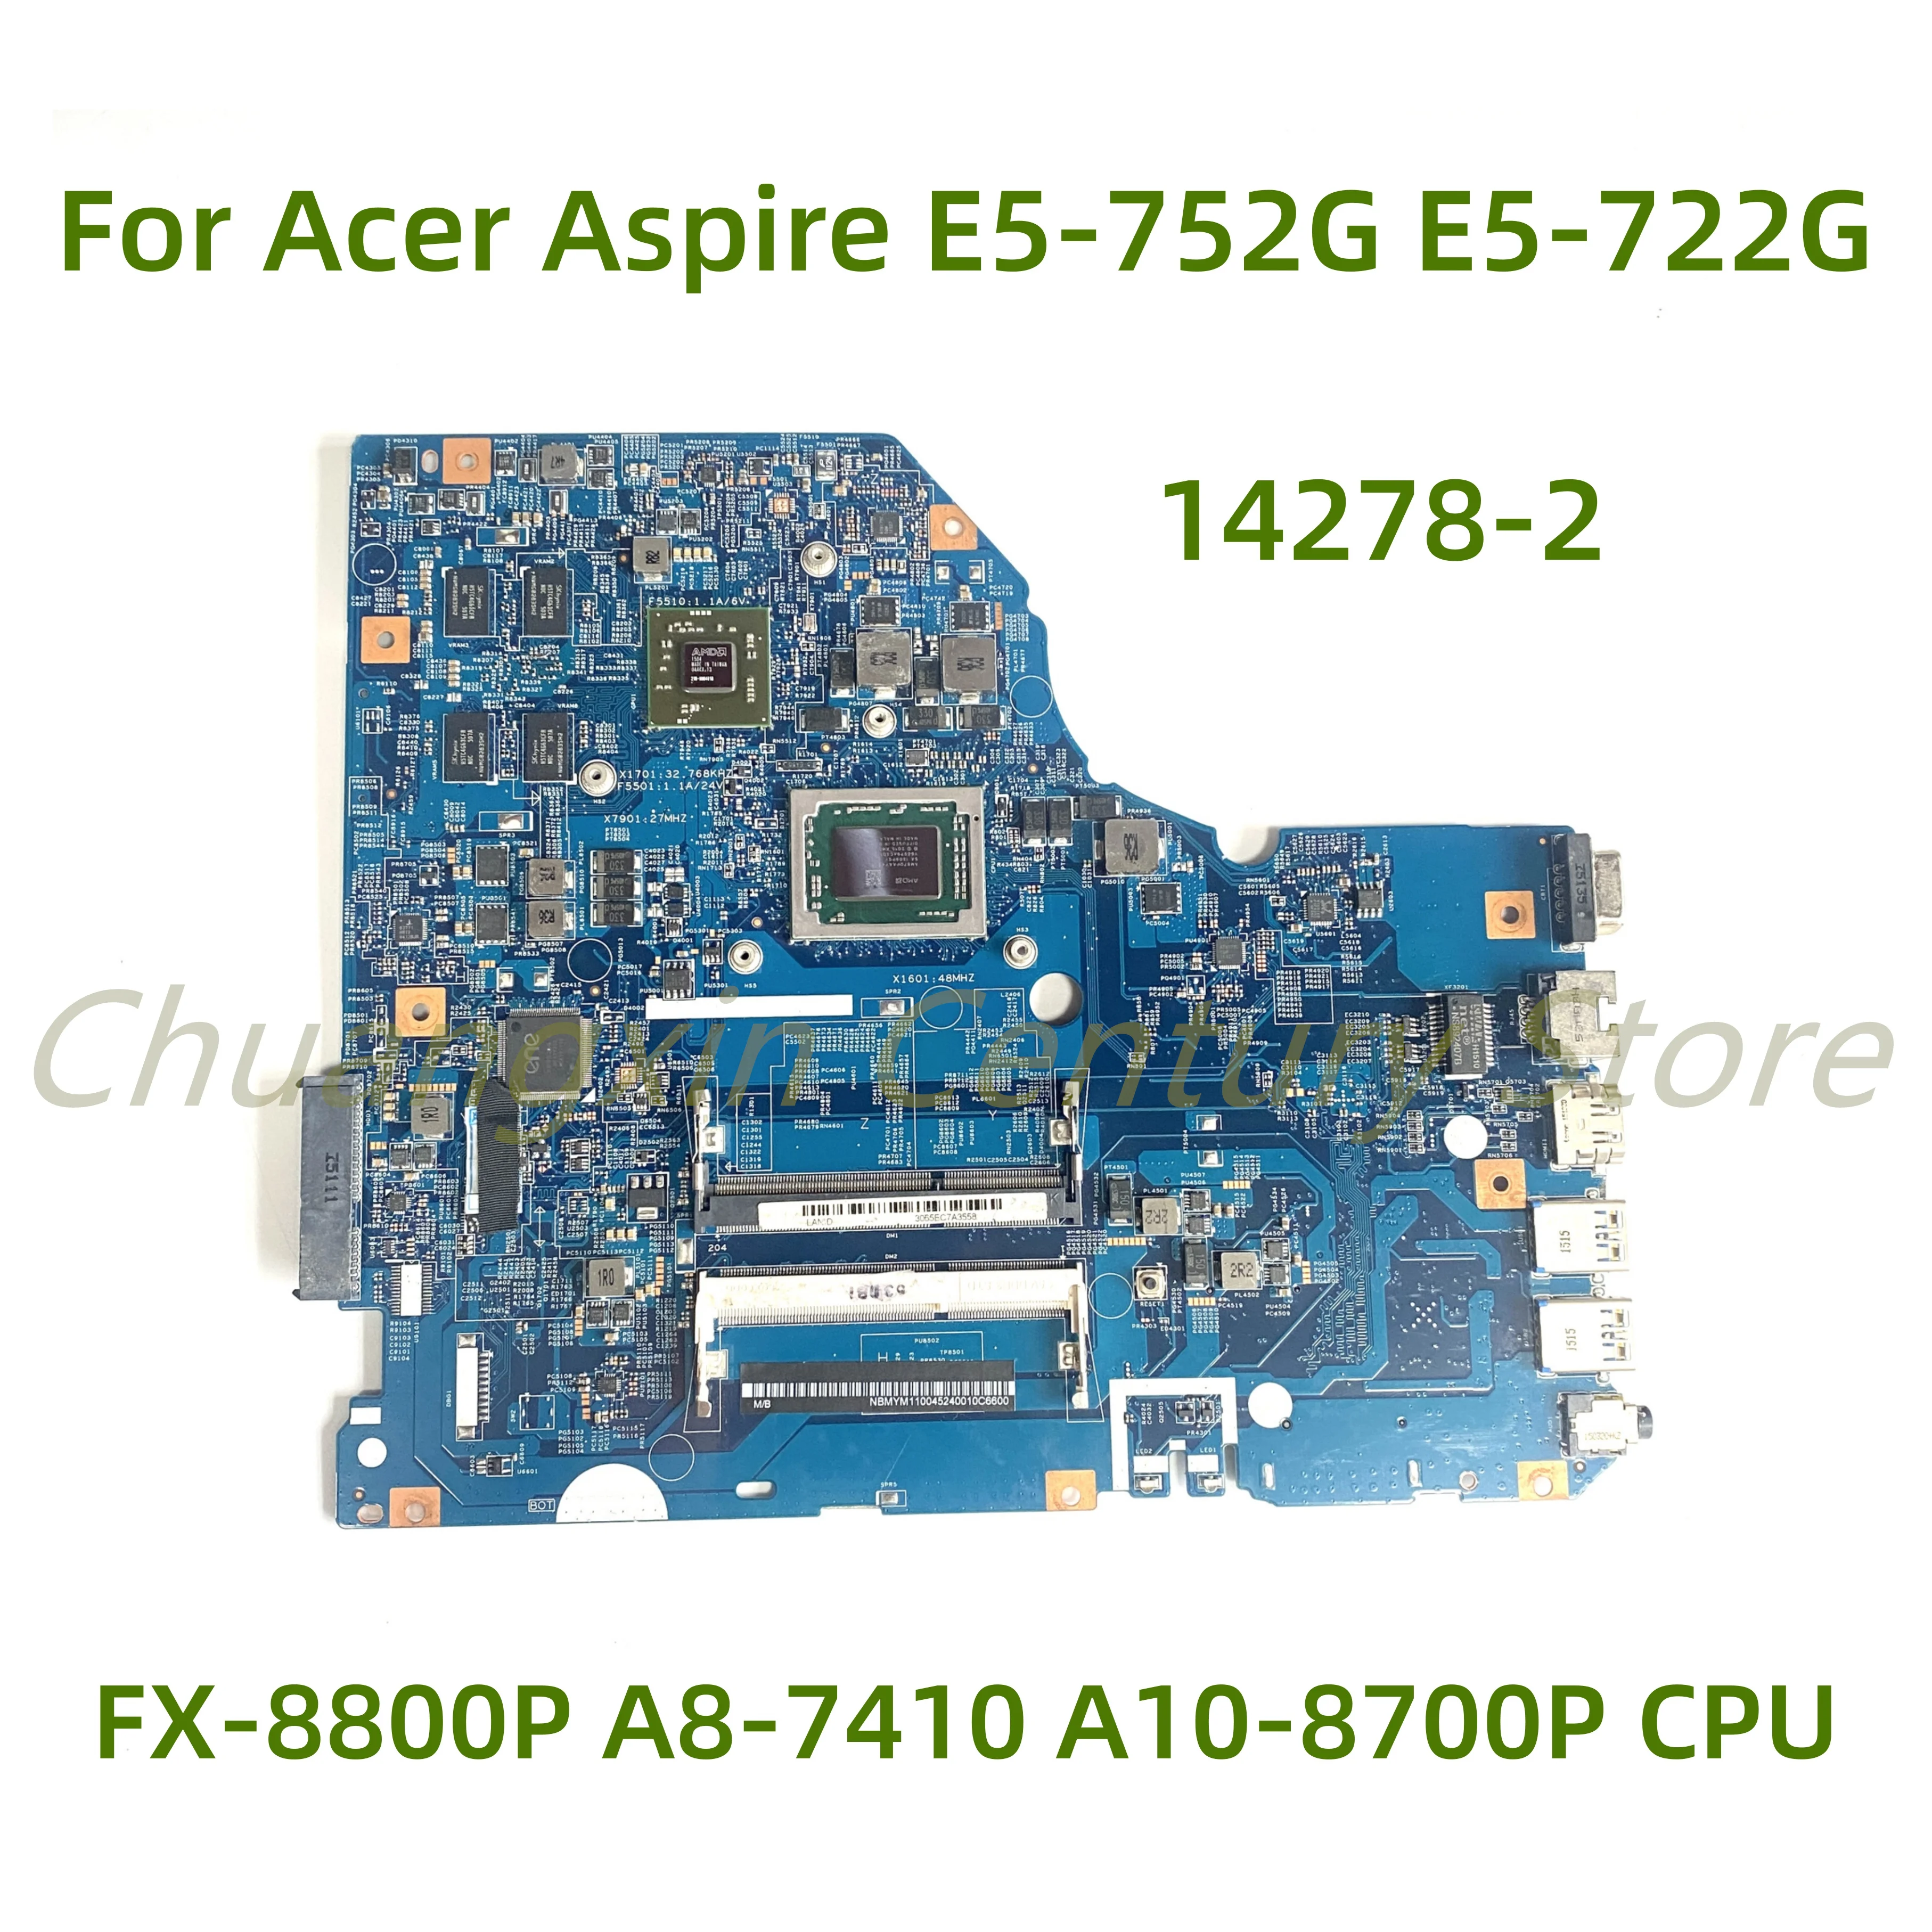 

For Acer Aspire E5-752G E5-722G Laptop motherboard 14278-2 with CPU FX-8800P A8-7410 A10-8700P 2GB 100% Tested Fully Work